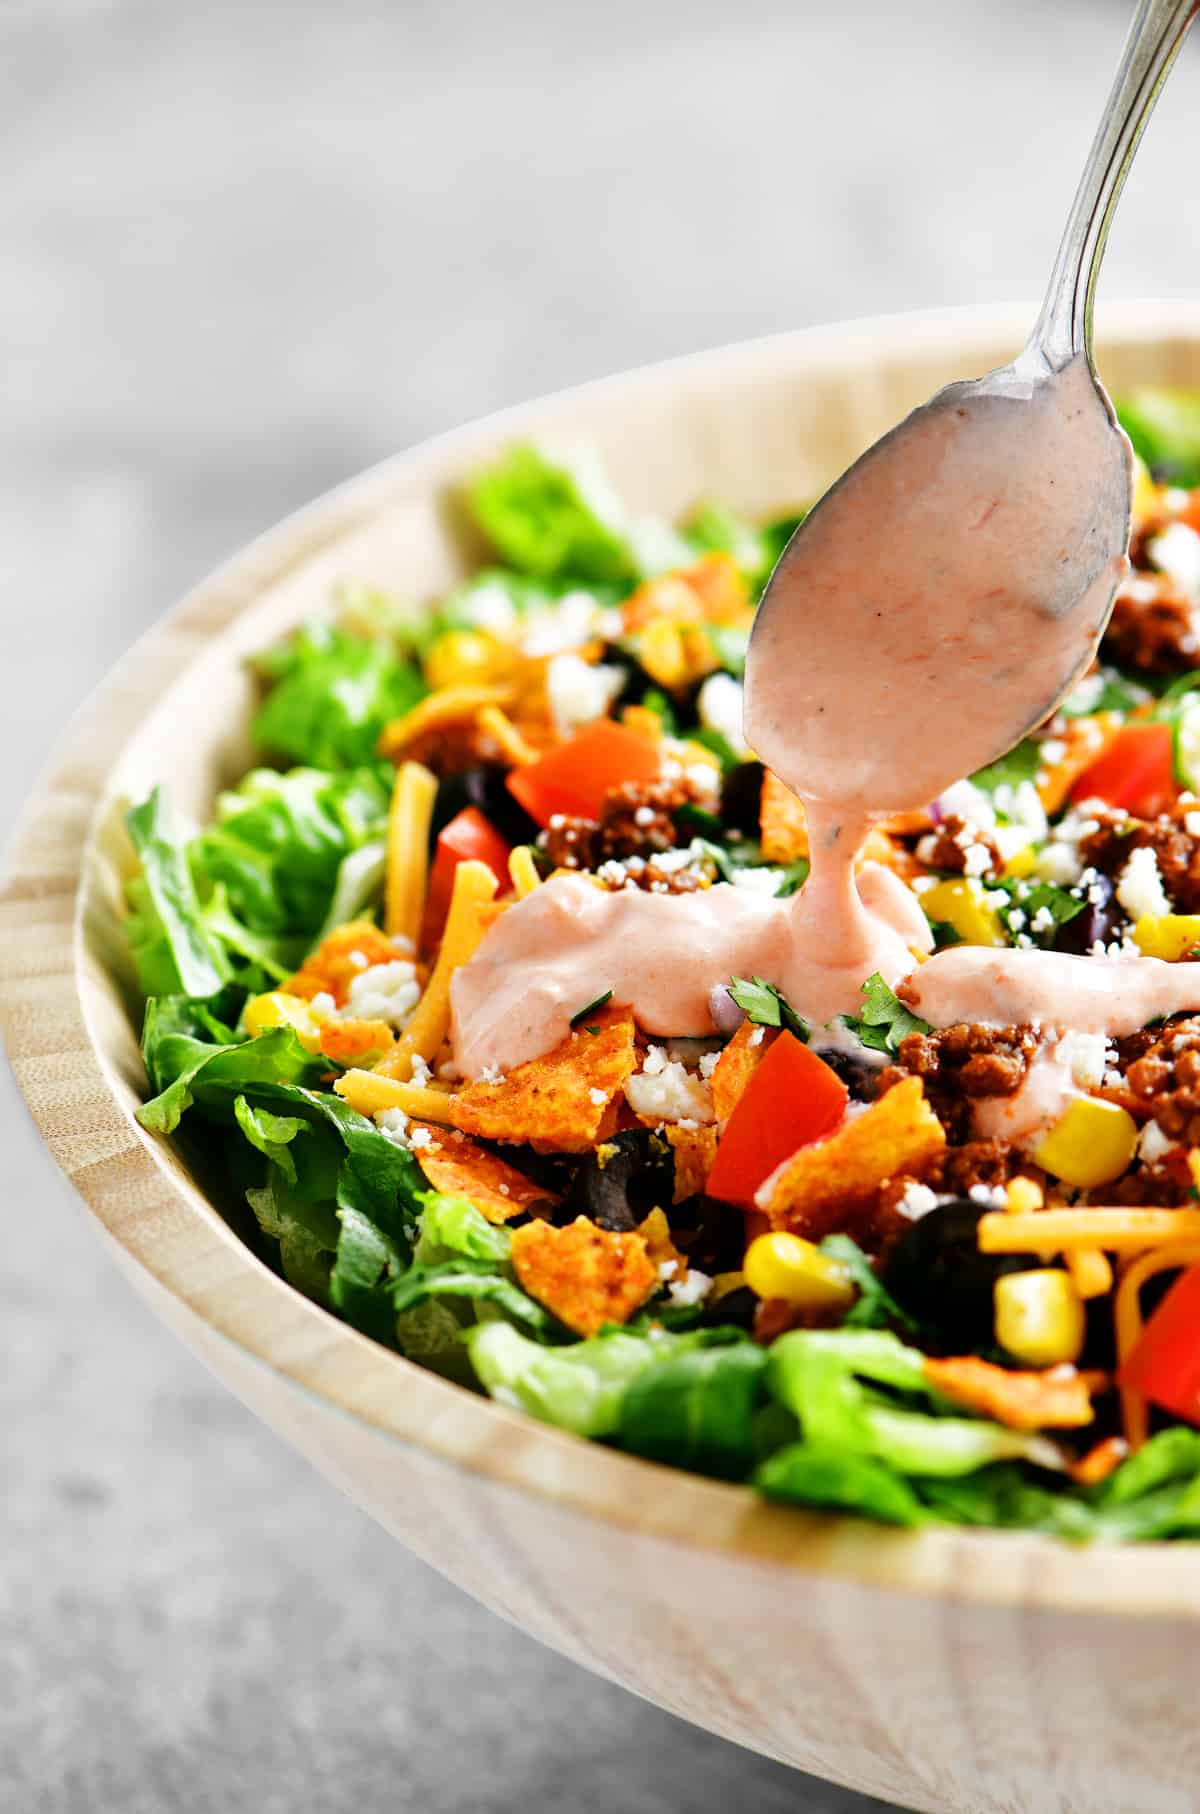 adding dressing to the salad with a spoon